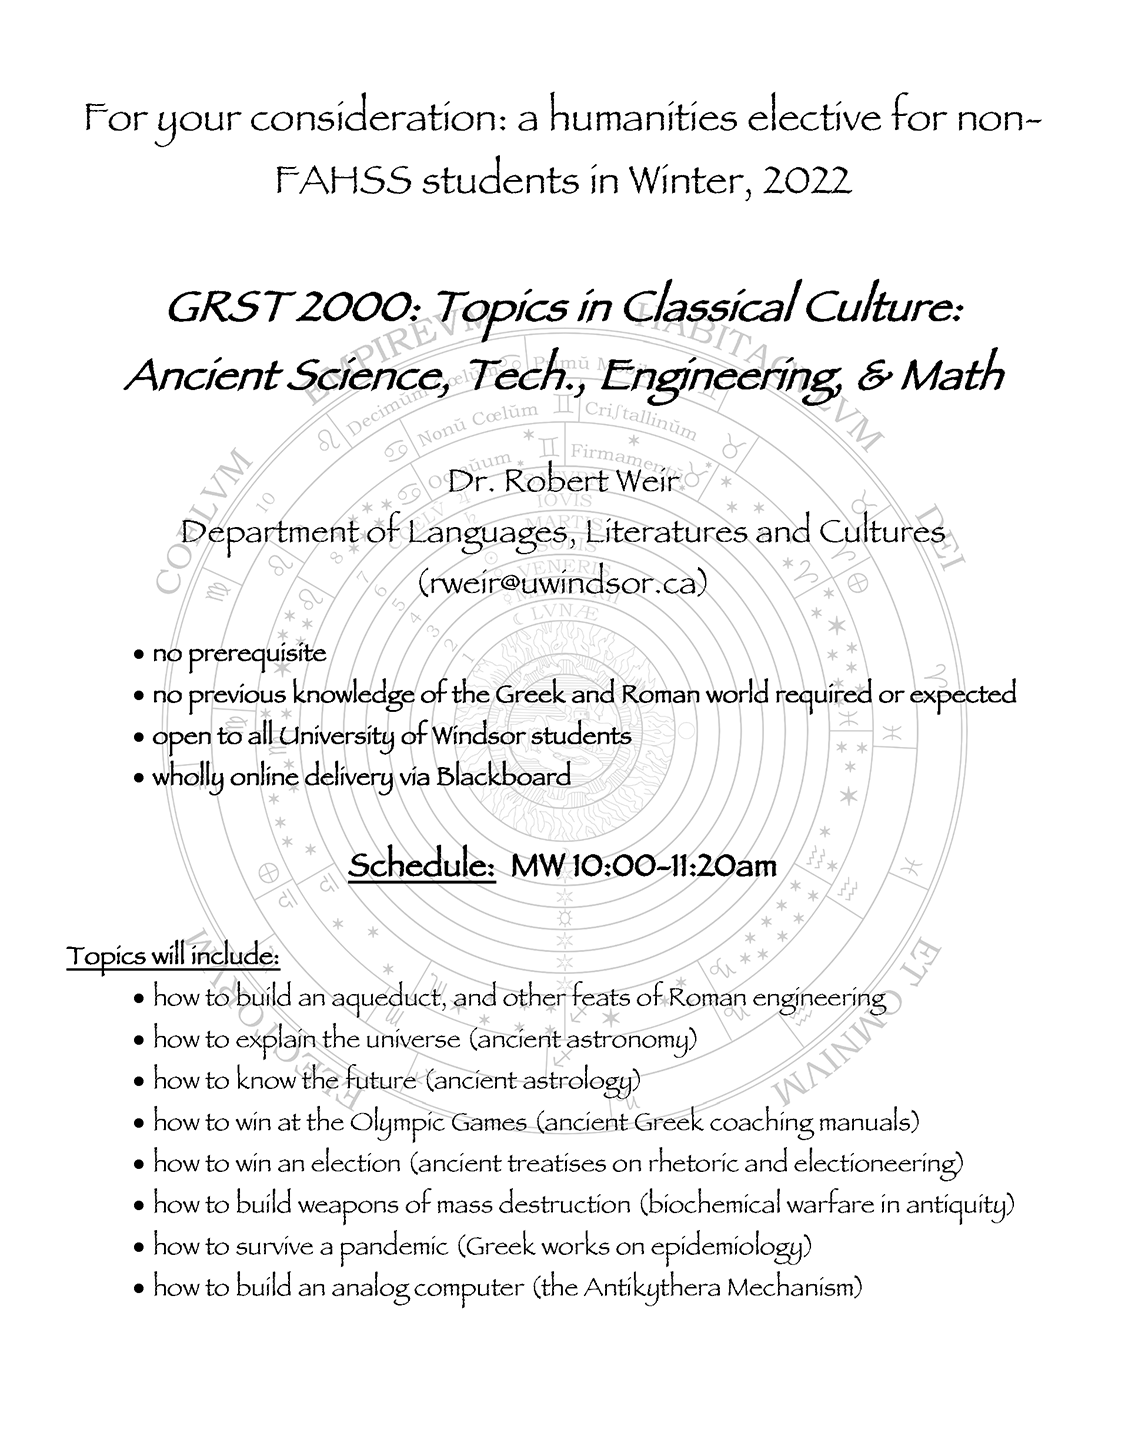 GRST 2000 - Ancient Science, Tech., Engineering, & Math